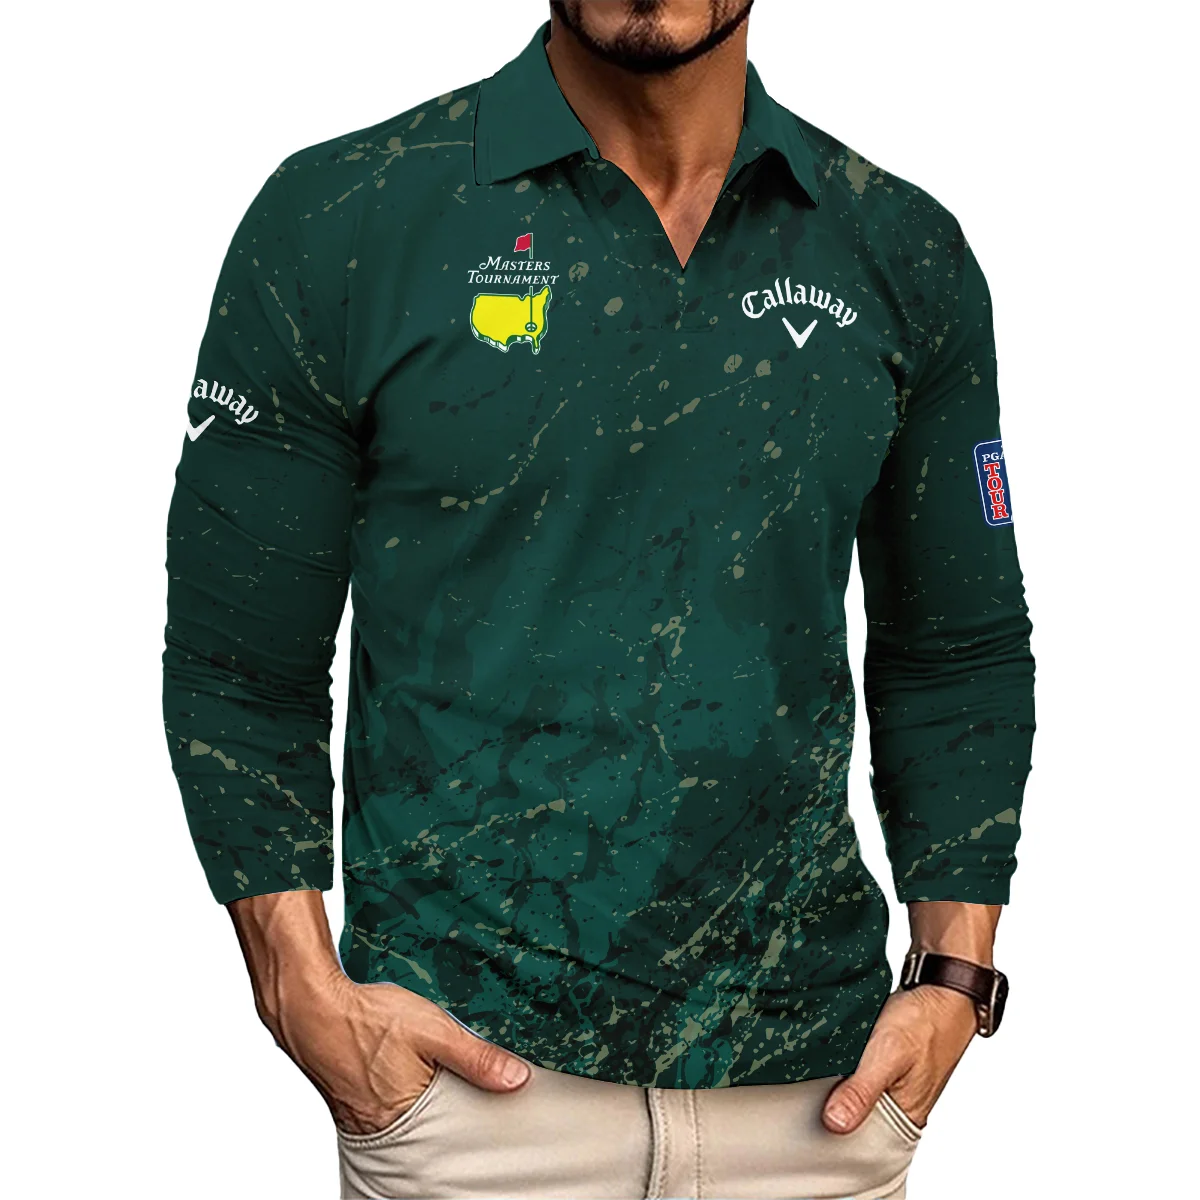 Old Cracked Texture With Gold Splash Paint Masters Tournament Callaway Zipper Polo Shirt Style Classic Zipper Polo Shirt For Men